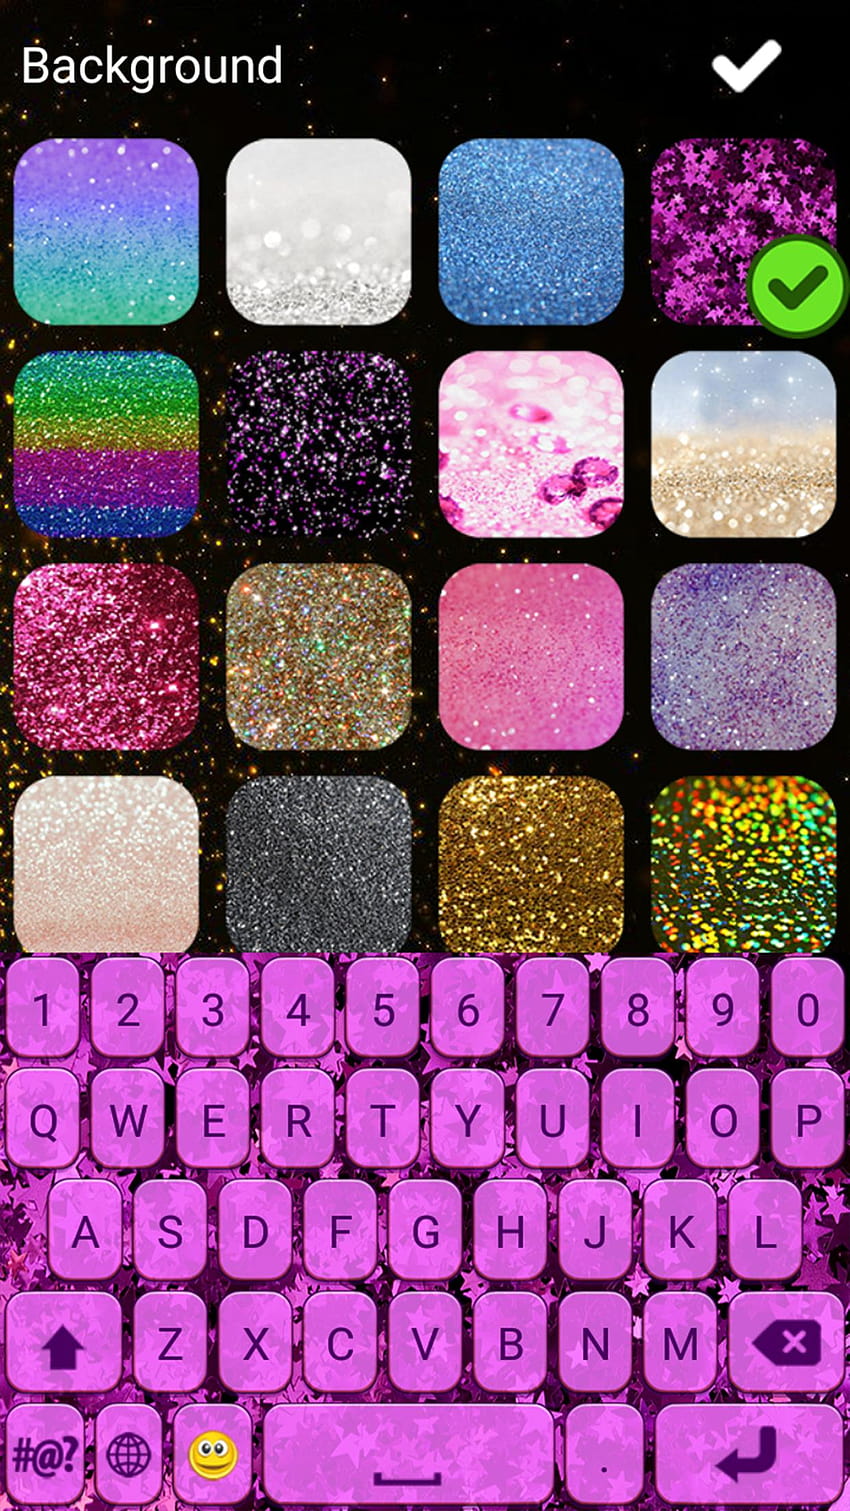 Customize Your Phone with cute wallpaper keyboard for a Cute Look